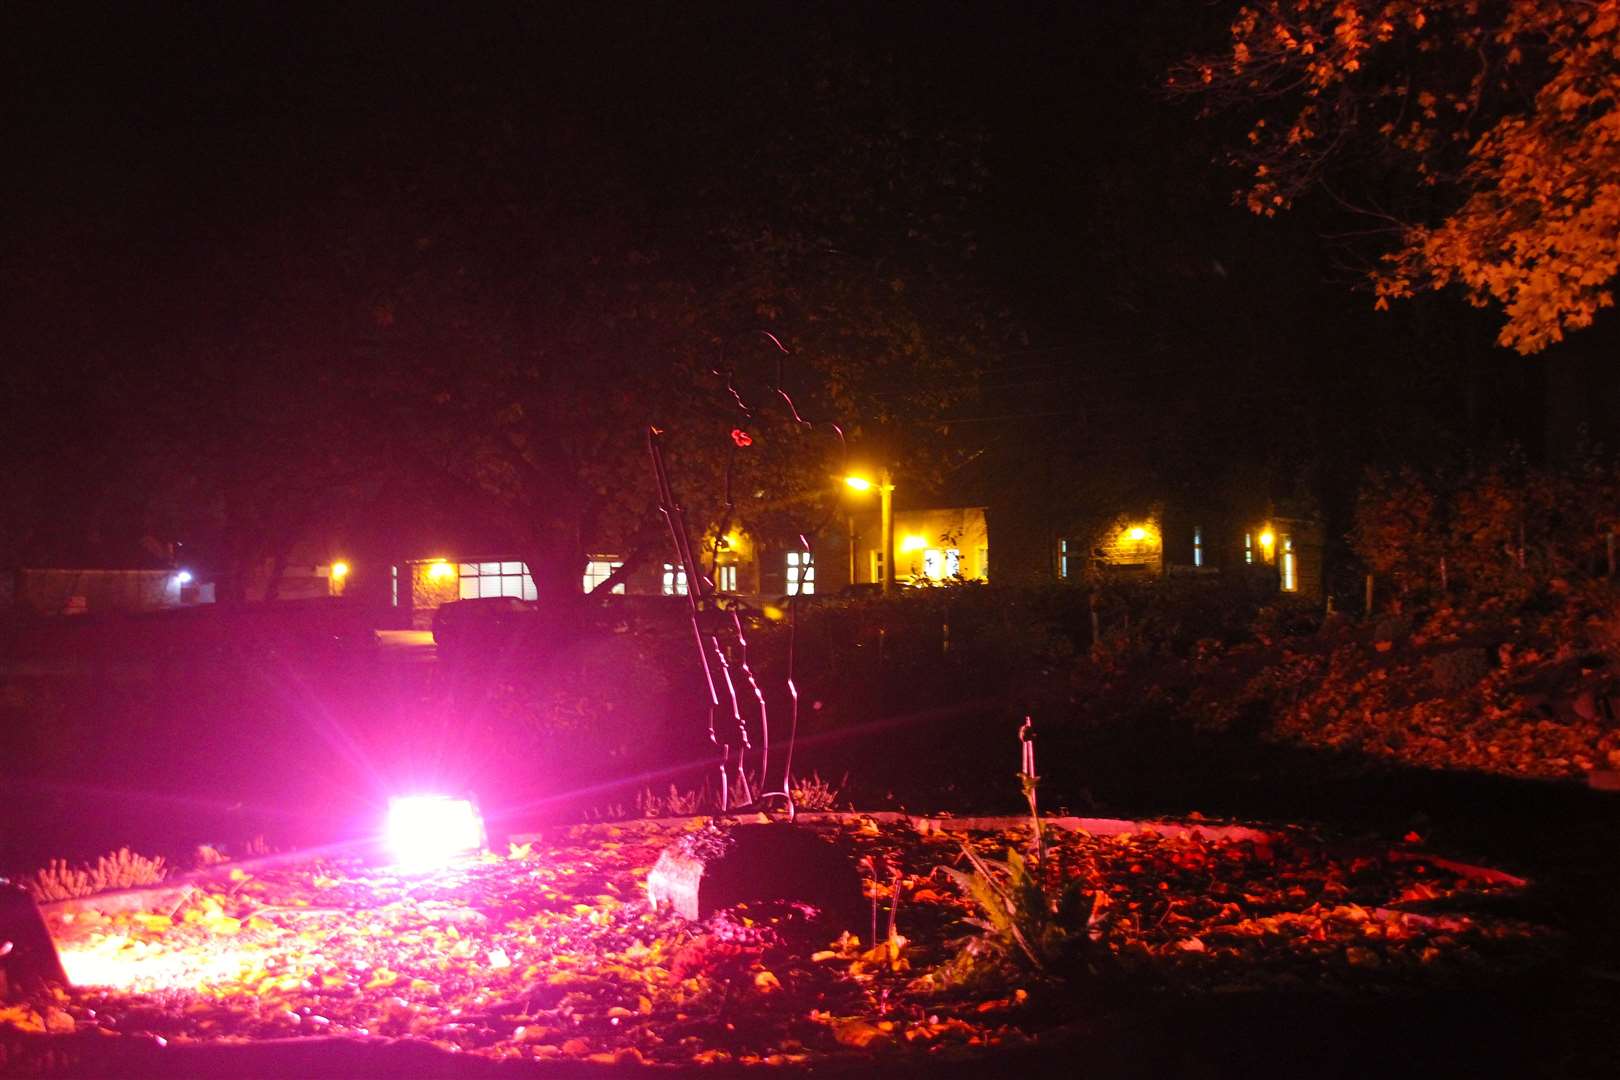 The soldier outline in the memorial garden is glowing red in the dark this week.